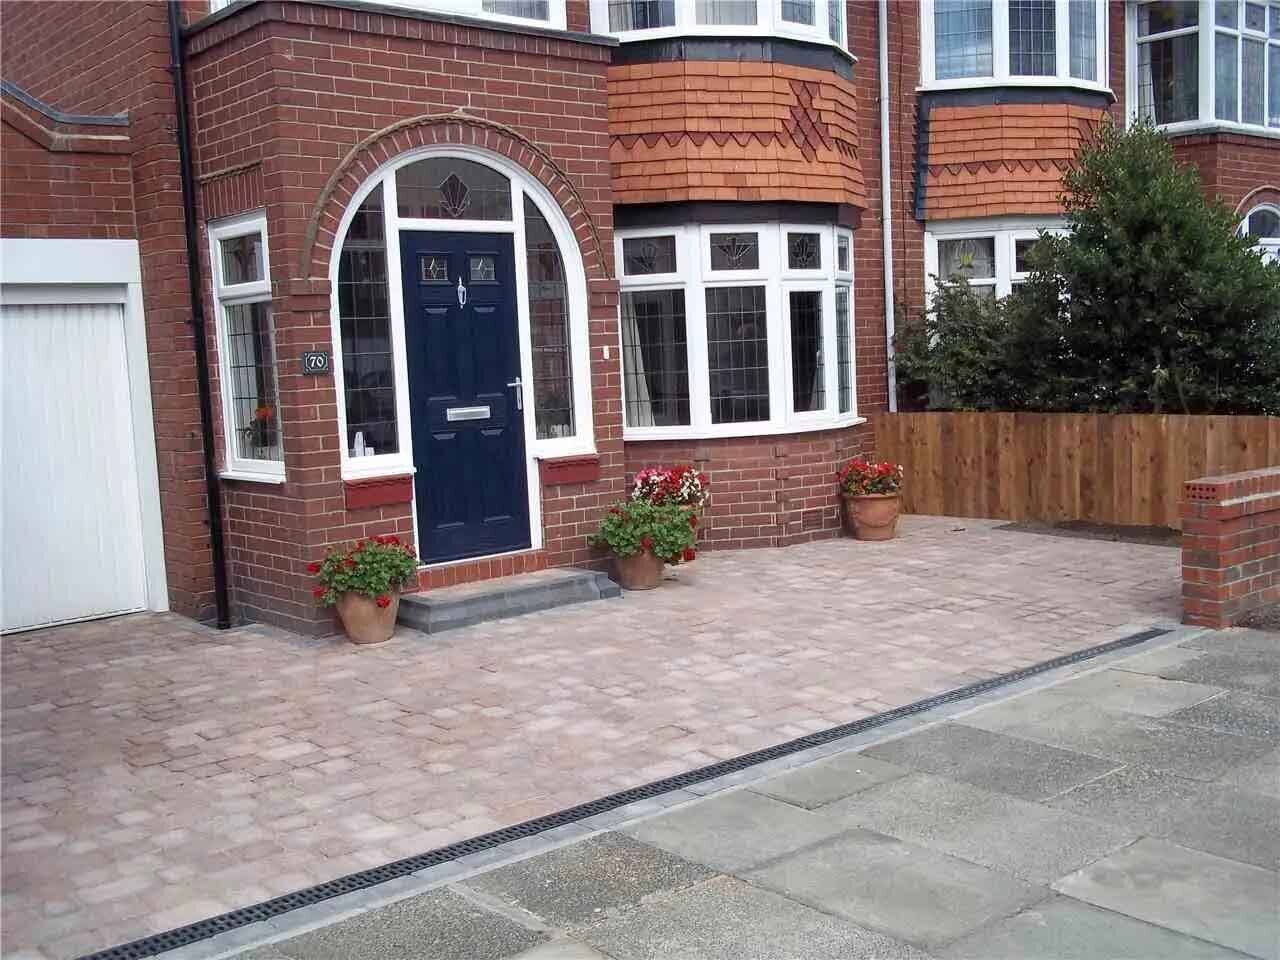 With a strong commitment to excellence and customer satisfaction, the company aims to improve driveways in Watford and surrounding areas by enhancing their look and durability, increasing the value of their properties.